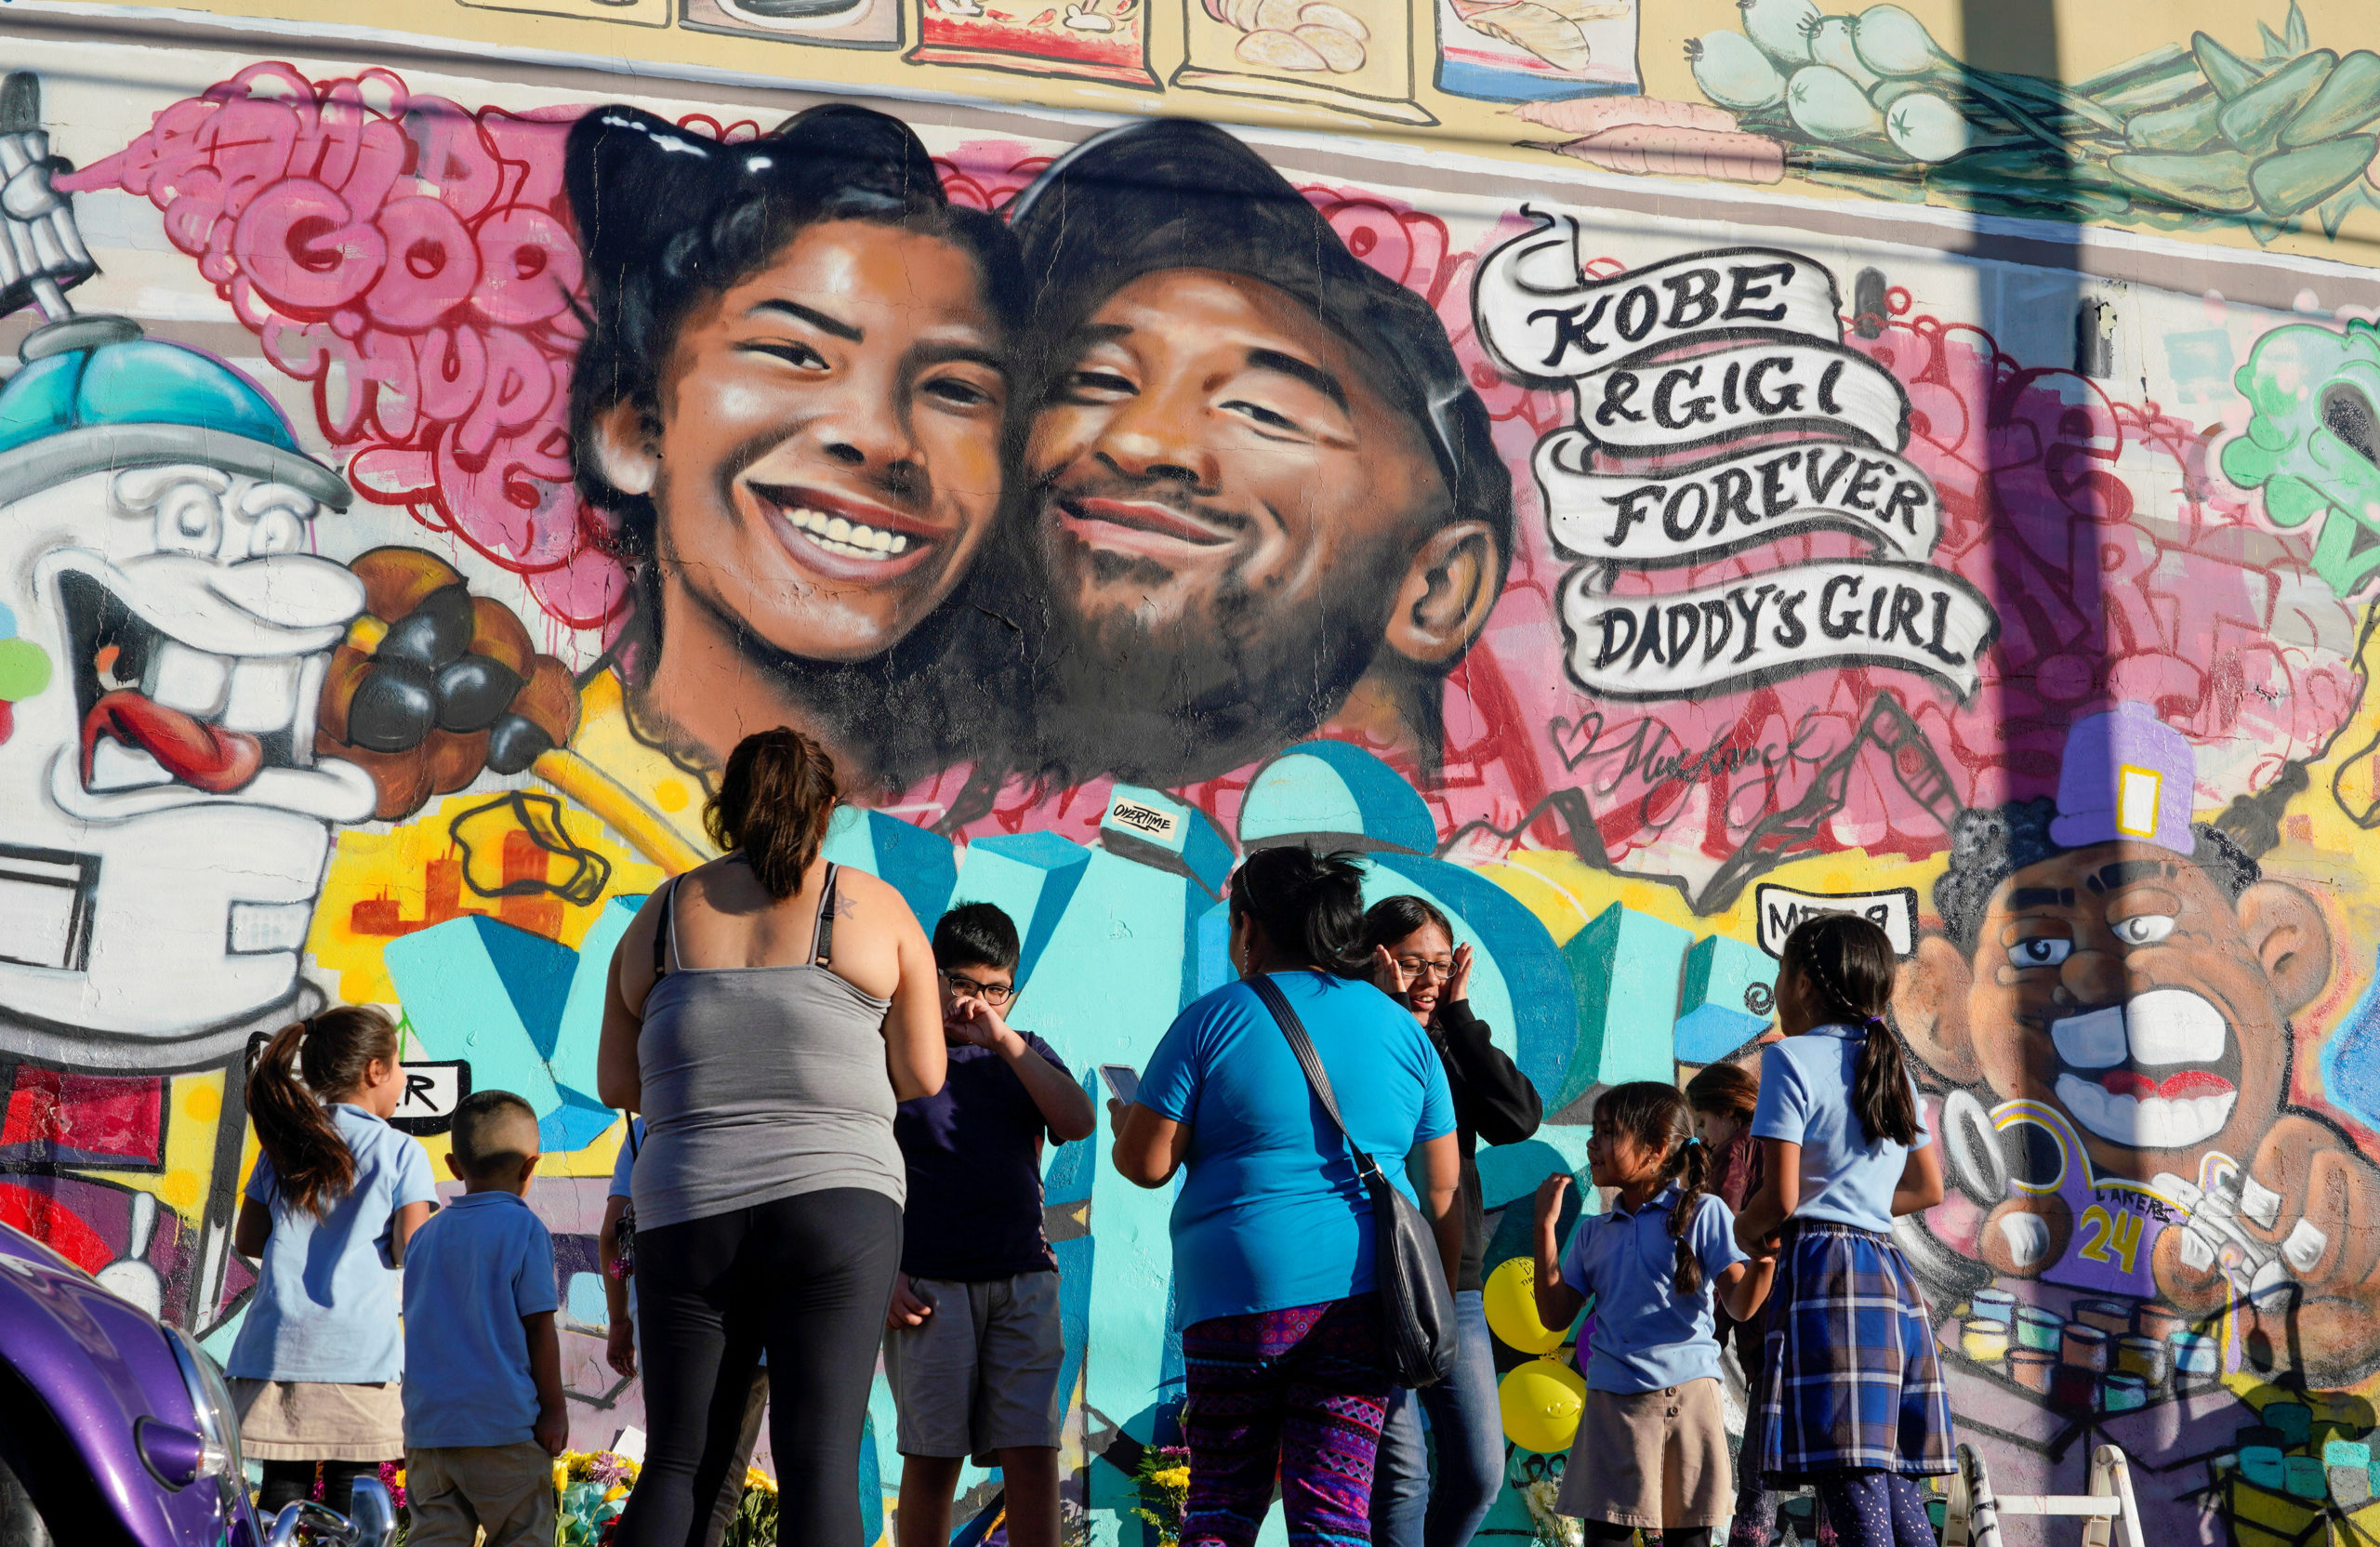 FILE PHOTO: Fans gather around a mural to pay respects to Kobe Bryant after a helicopter crash killed the retired basketball star, in Los Angeles, California, U.S., January 28, 2020.  